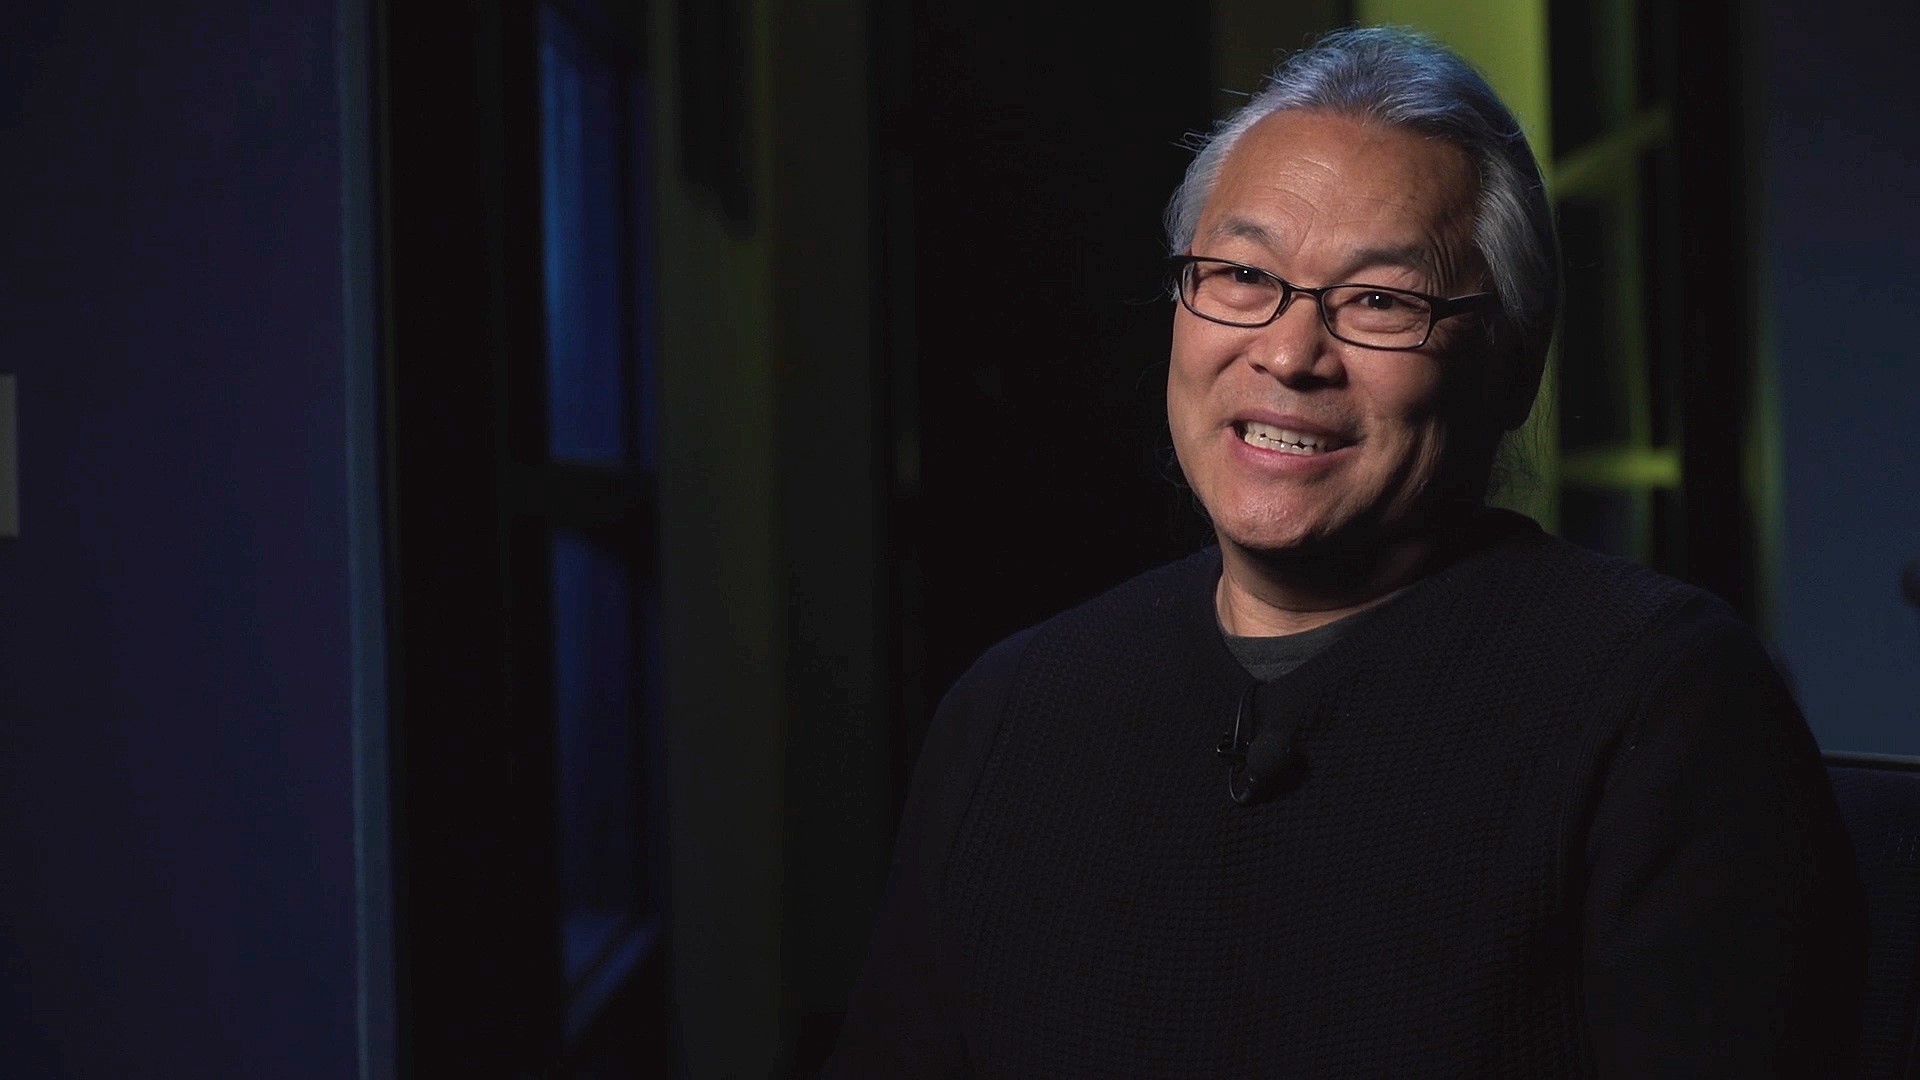 Sacramento Bee photographer Paul Kitagaki Jr. spoke to ABC10 about what it means for Japanese Americans that California apologized for internment camps during WWII.